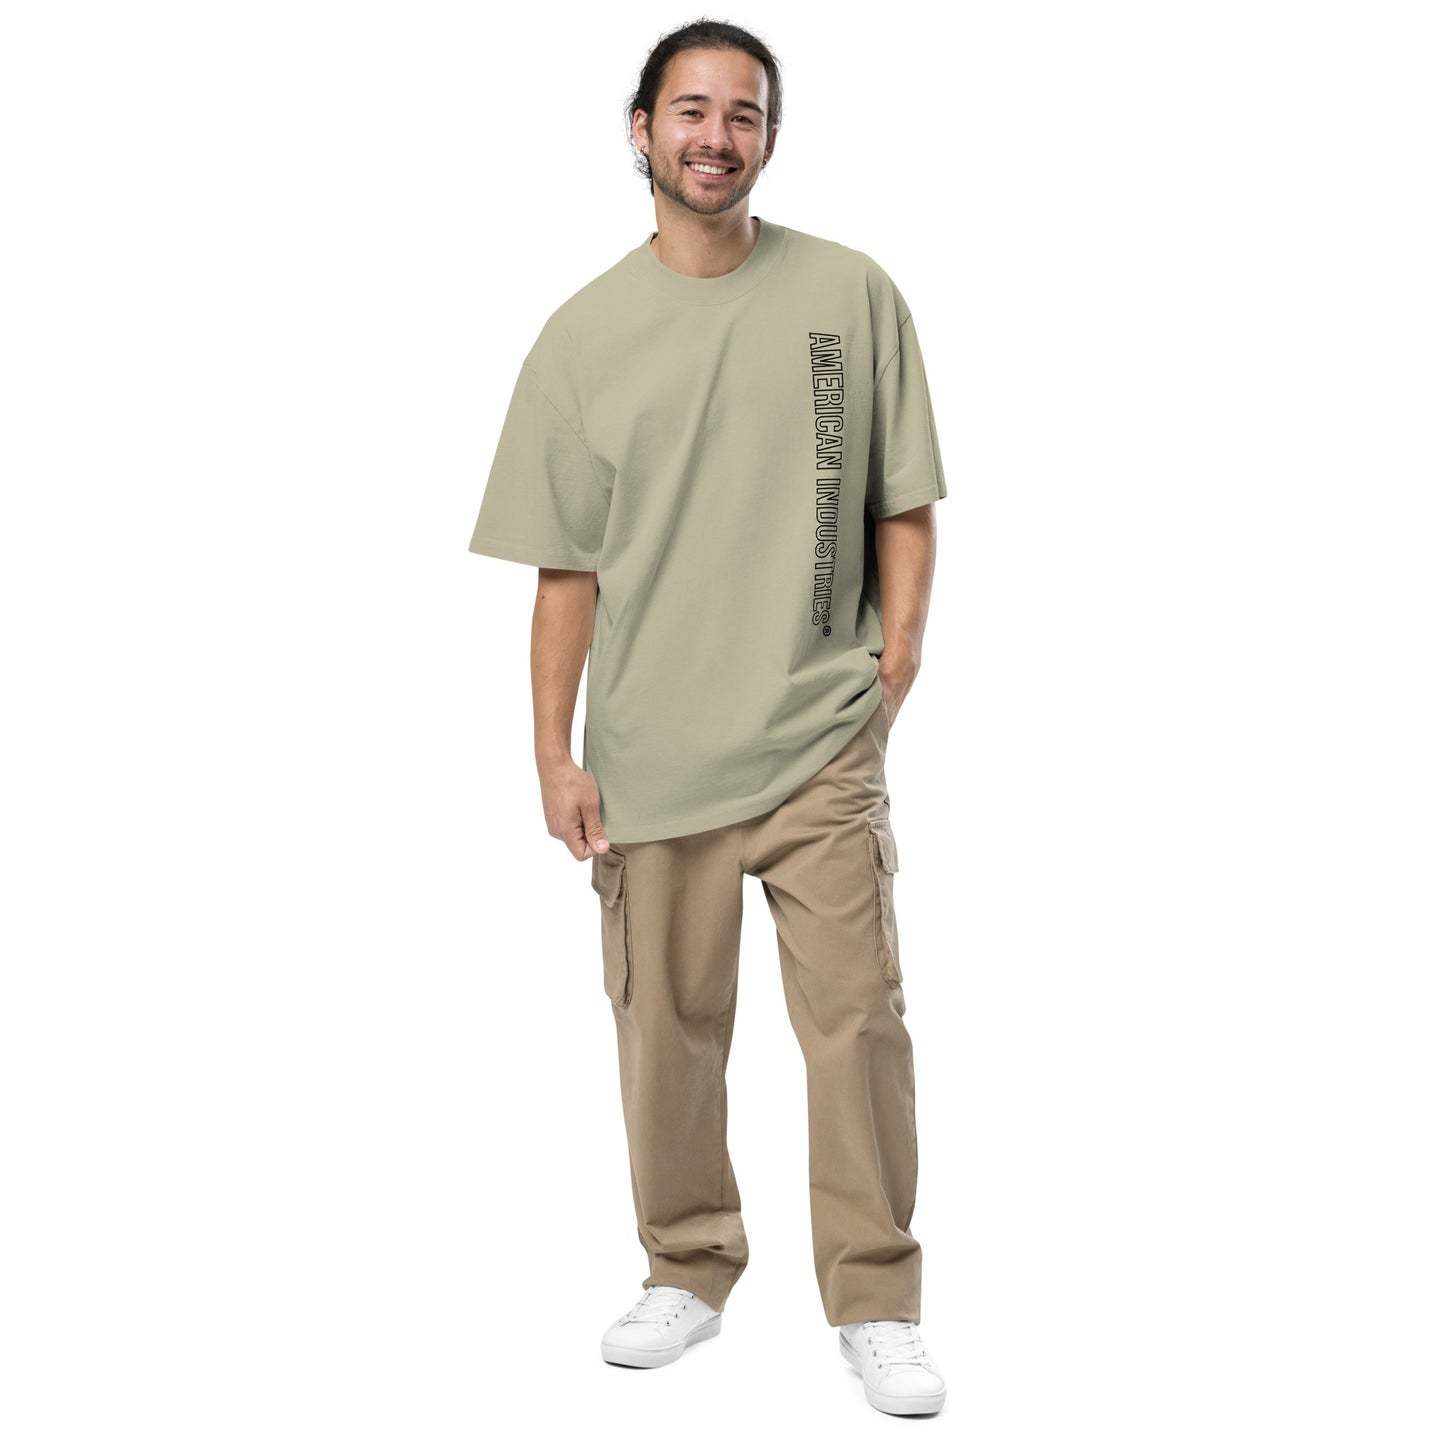 American Industries ® HWA Oversized faded t-shirt